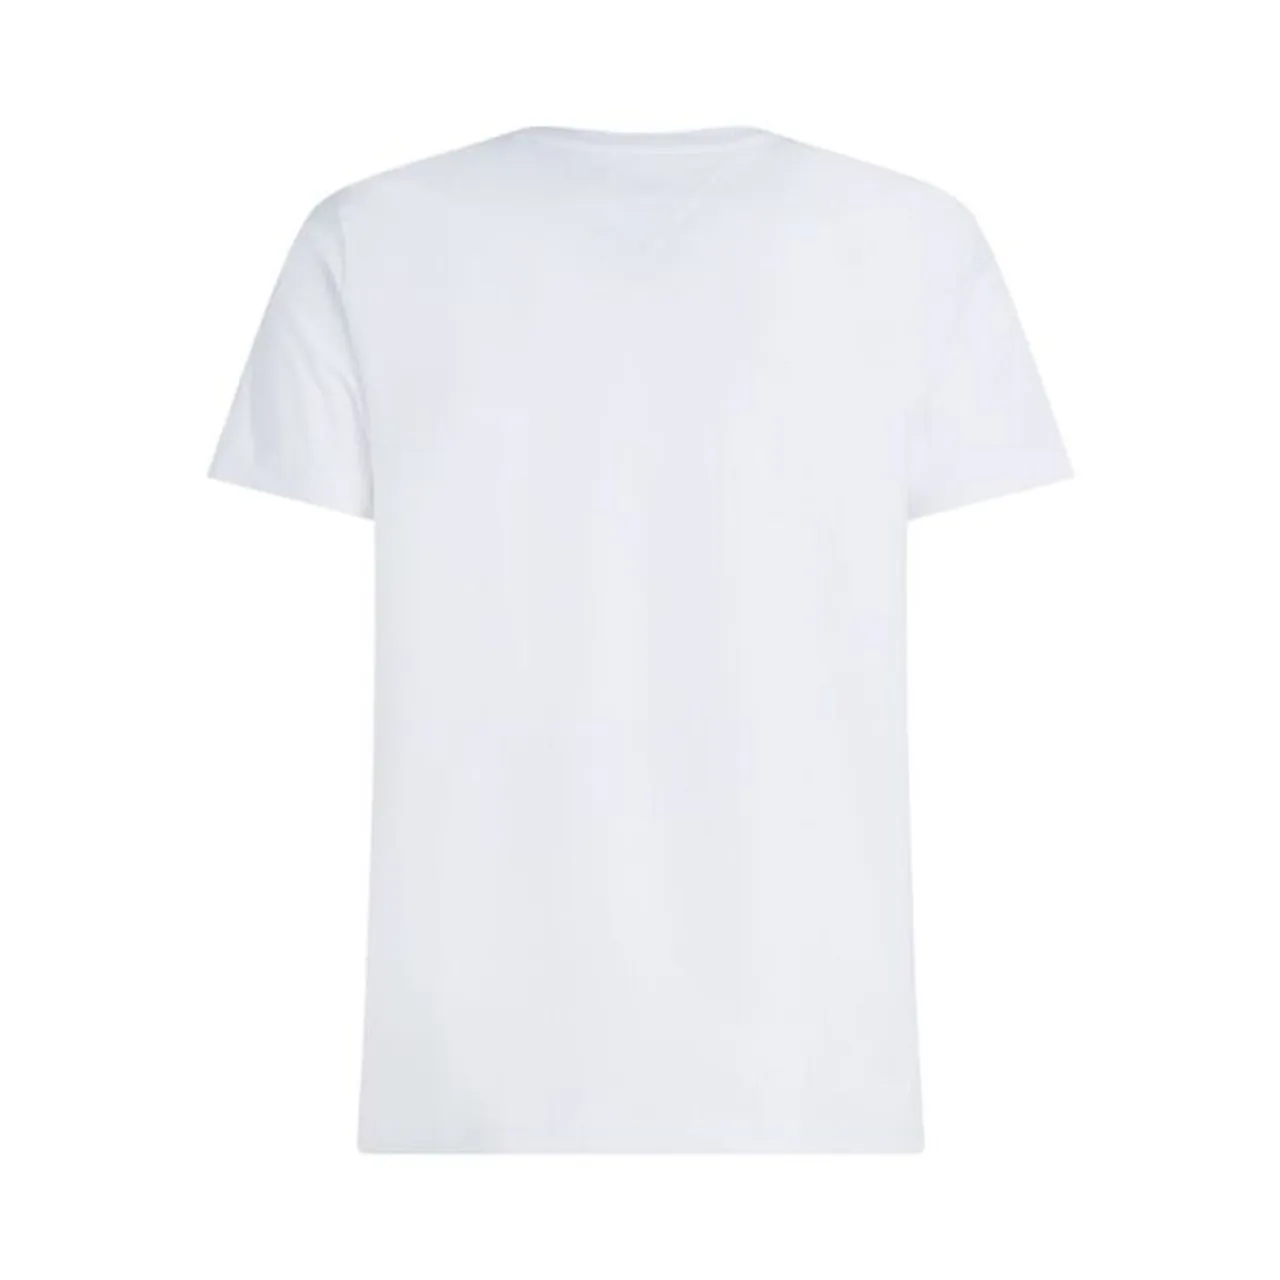 Tommy Hilfiger Core Stretch Slim Fit Crew Neck T-Shirt - White - Male